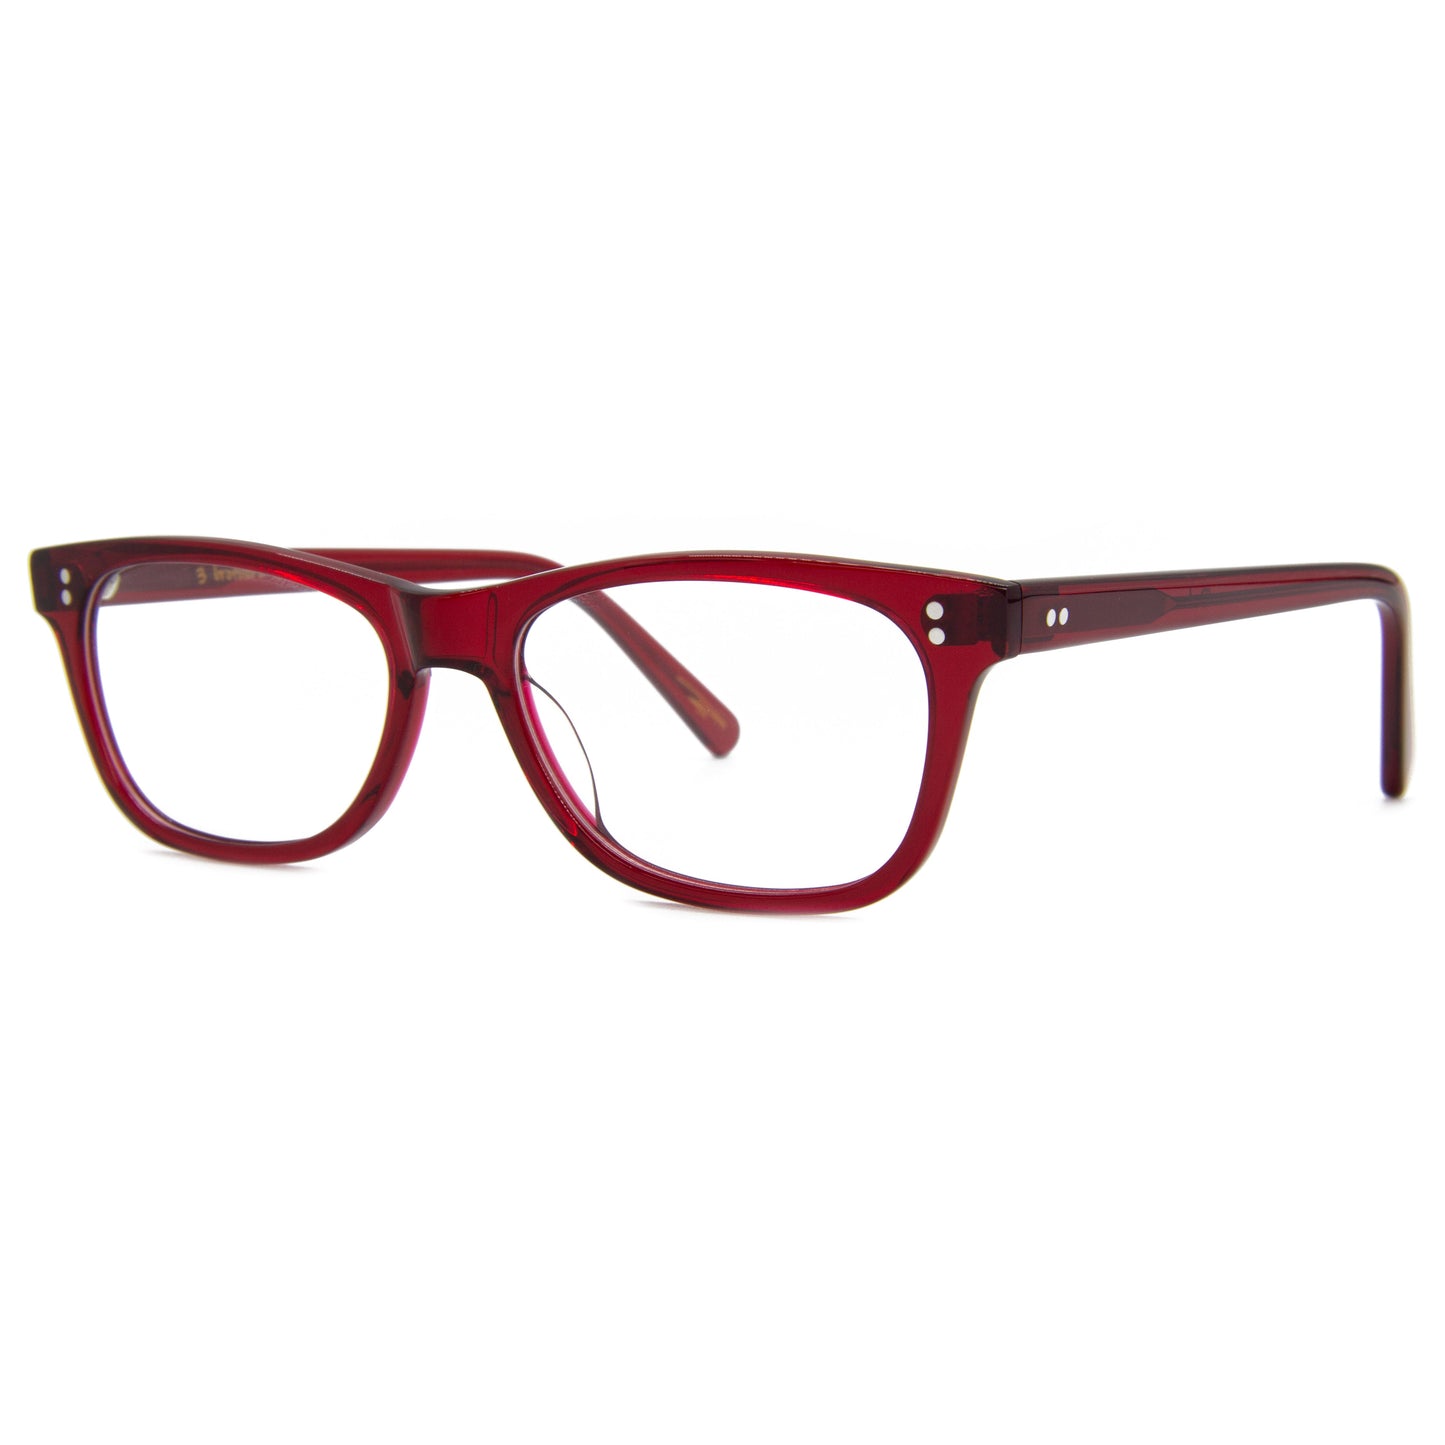 3 brothers - Mish - Red - Prescription Glasses - Side